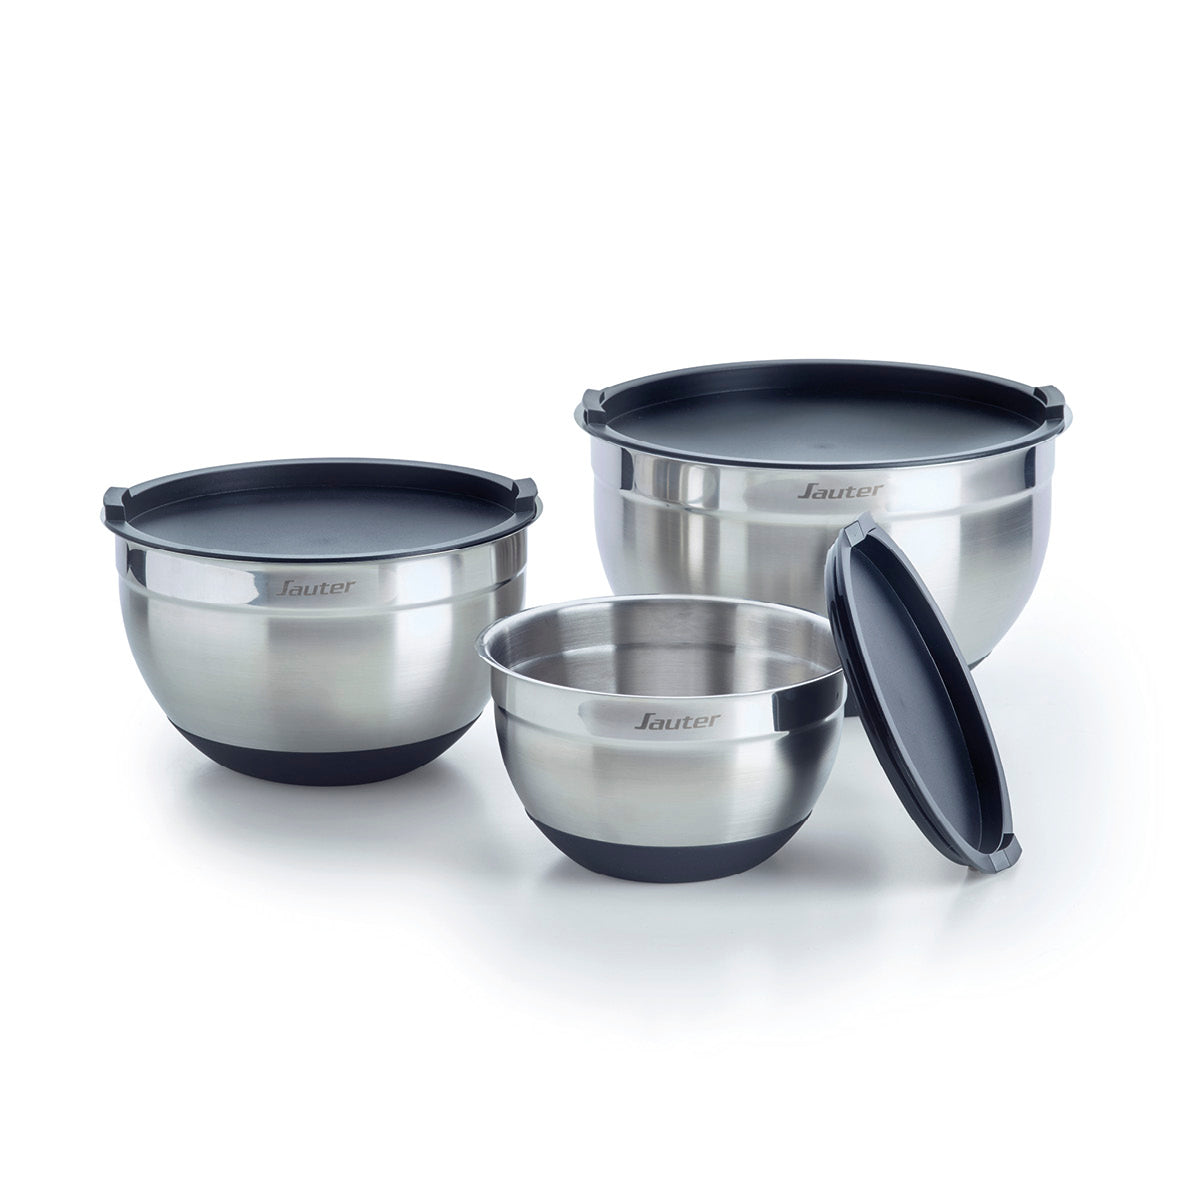 Stainless Steel Mixing Bowls - Comes with lids and a non slip base –  Curated Kitchenware